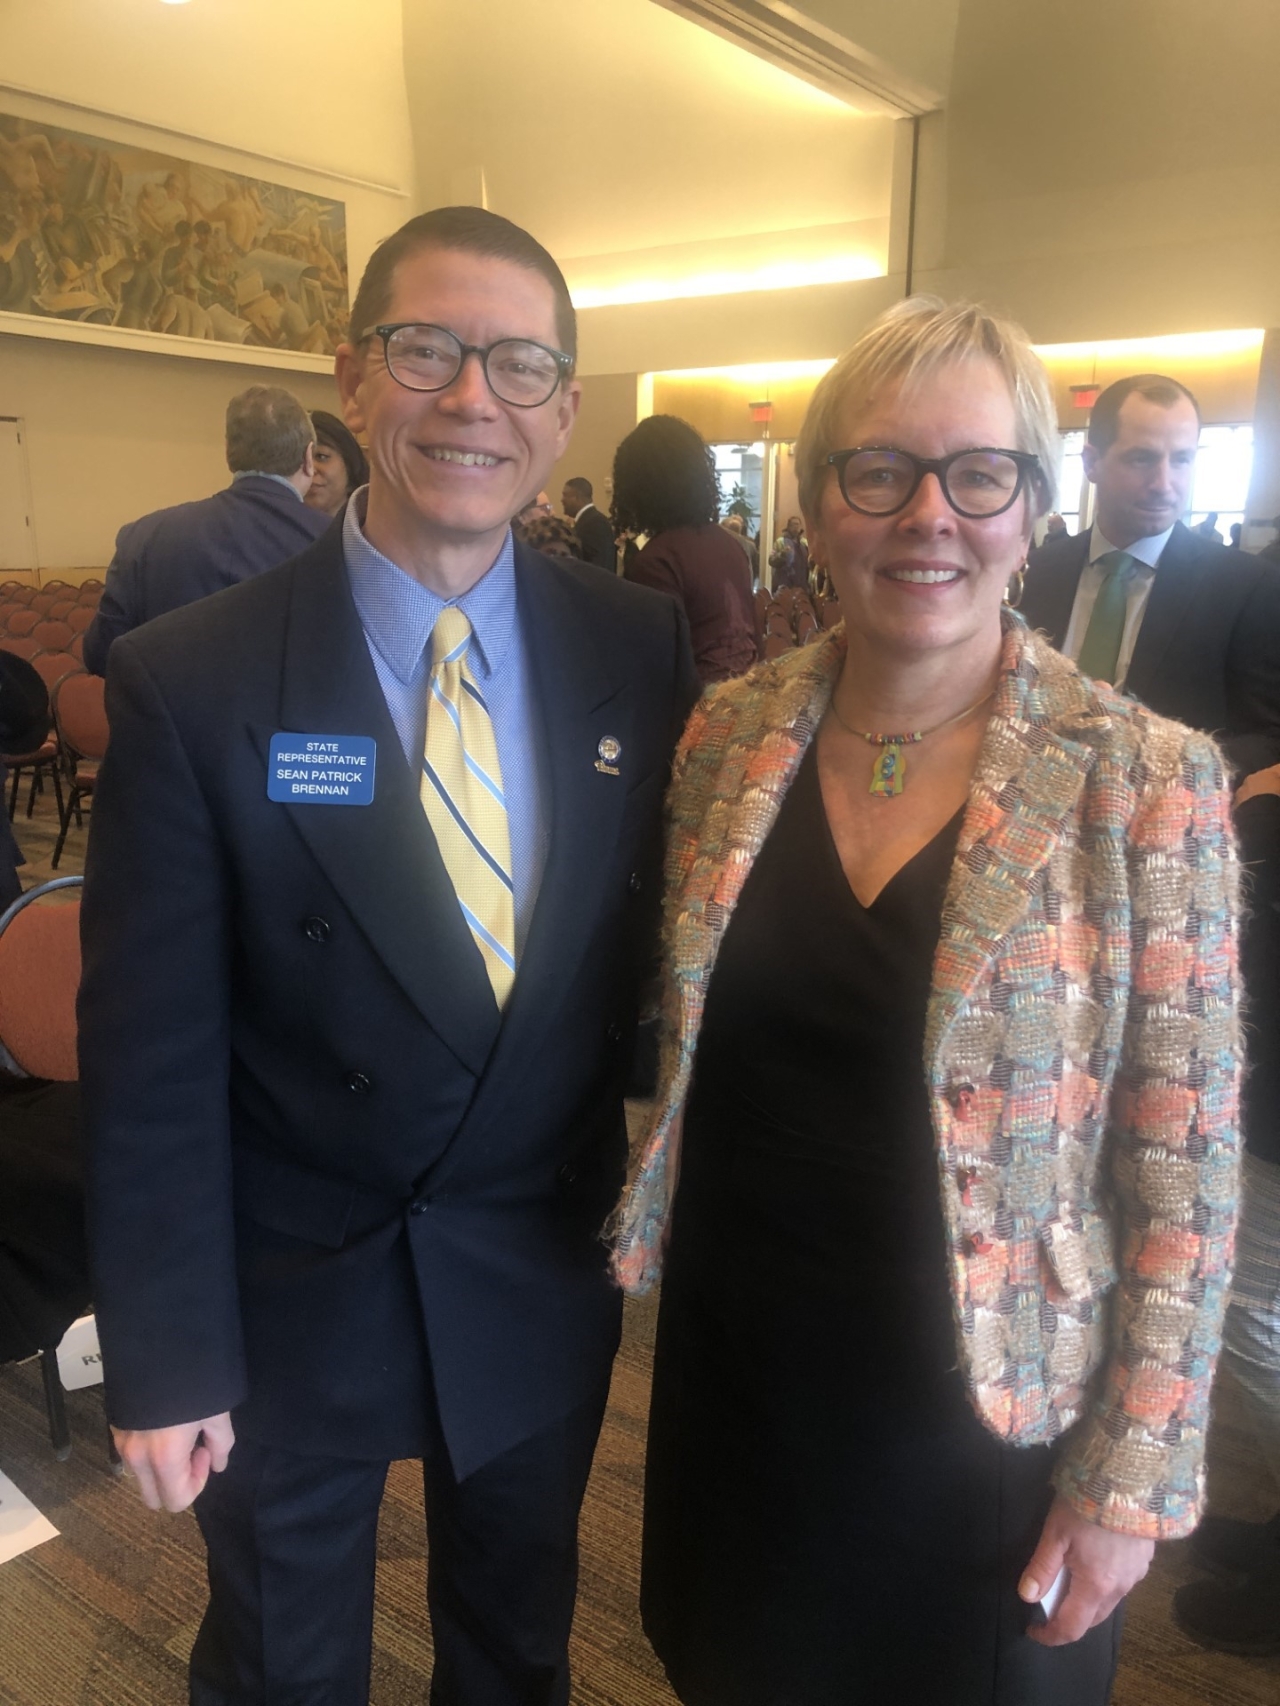 Rep. Brennan often meets with higher education leaders, like Dr. Laura Bloomberg, President of Cleveland State University, to talk about steps we can take to prepare Ohioans for the 21st century wo